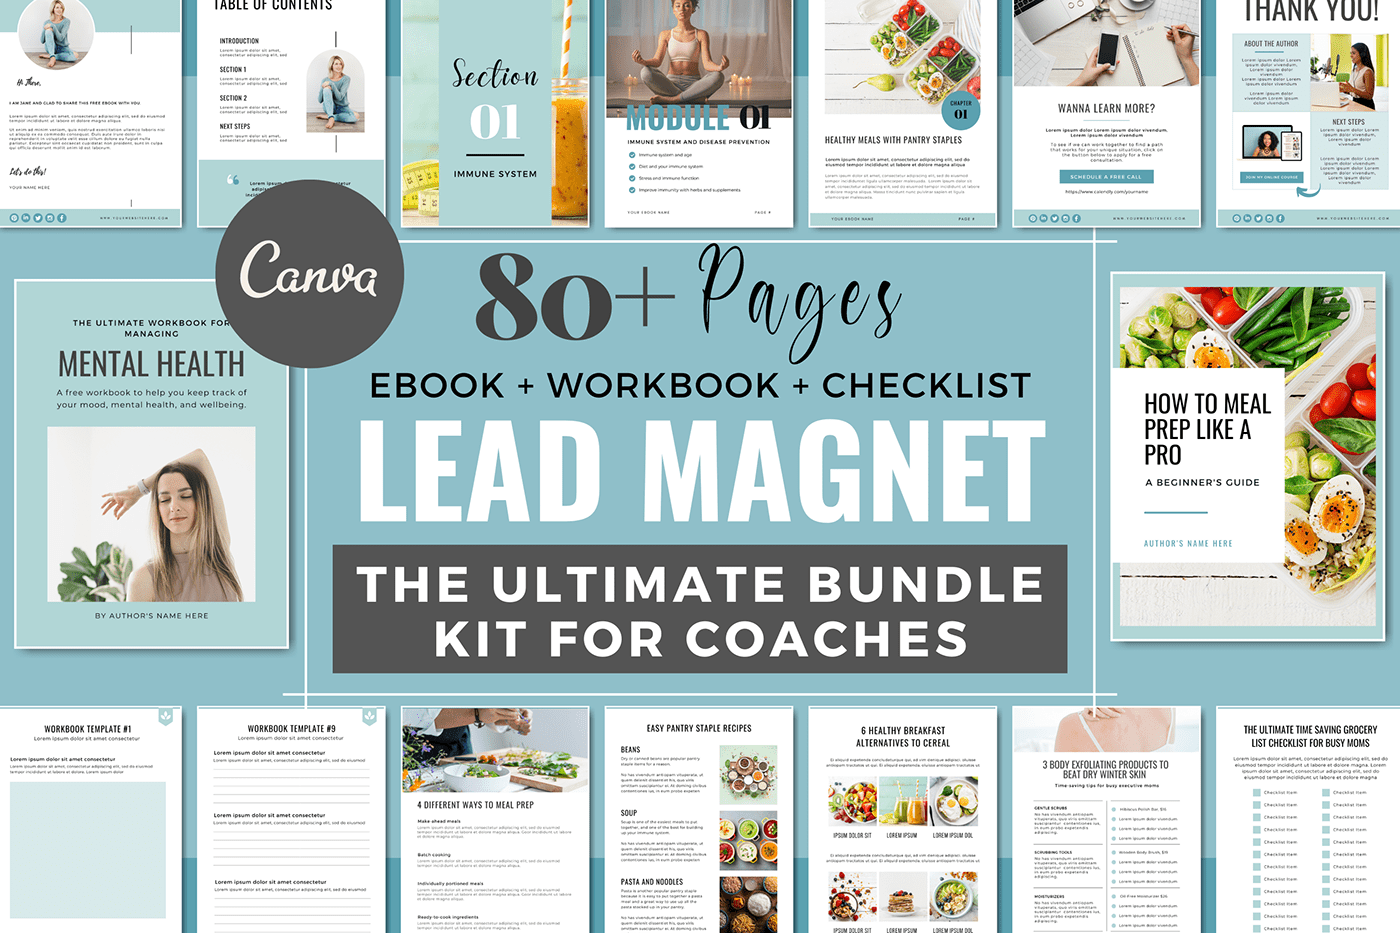 blogger lead magnet call to action coach lead magnet ebook template freebie template how to guide Lead Magnet Canva lead magnet wellness leadmagnet ebook opt-in template